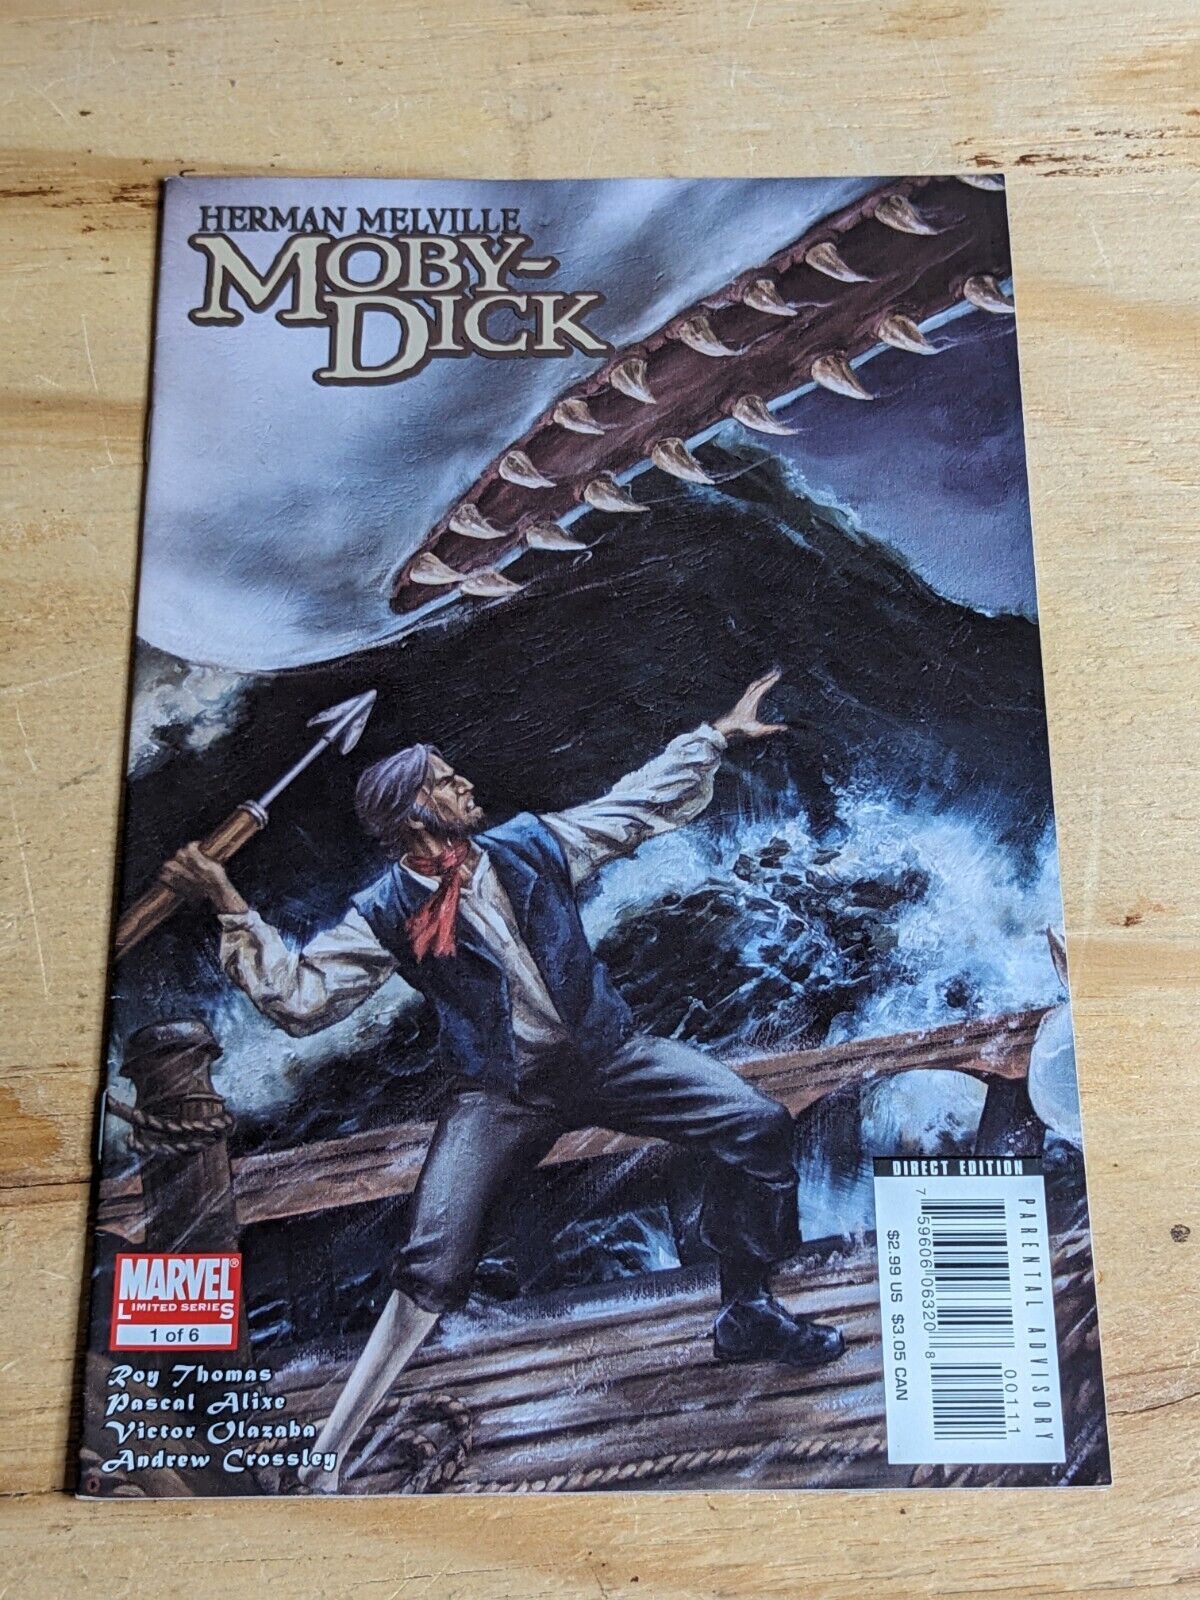 Marvel Illustrated Moby Dick Comic 1 Of 6 Herman Melville Limited Series Set